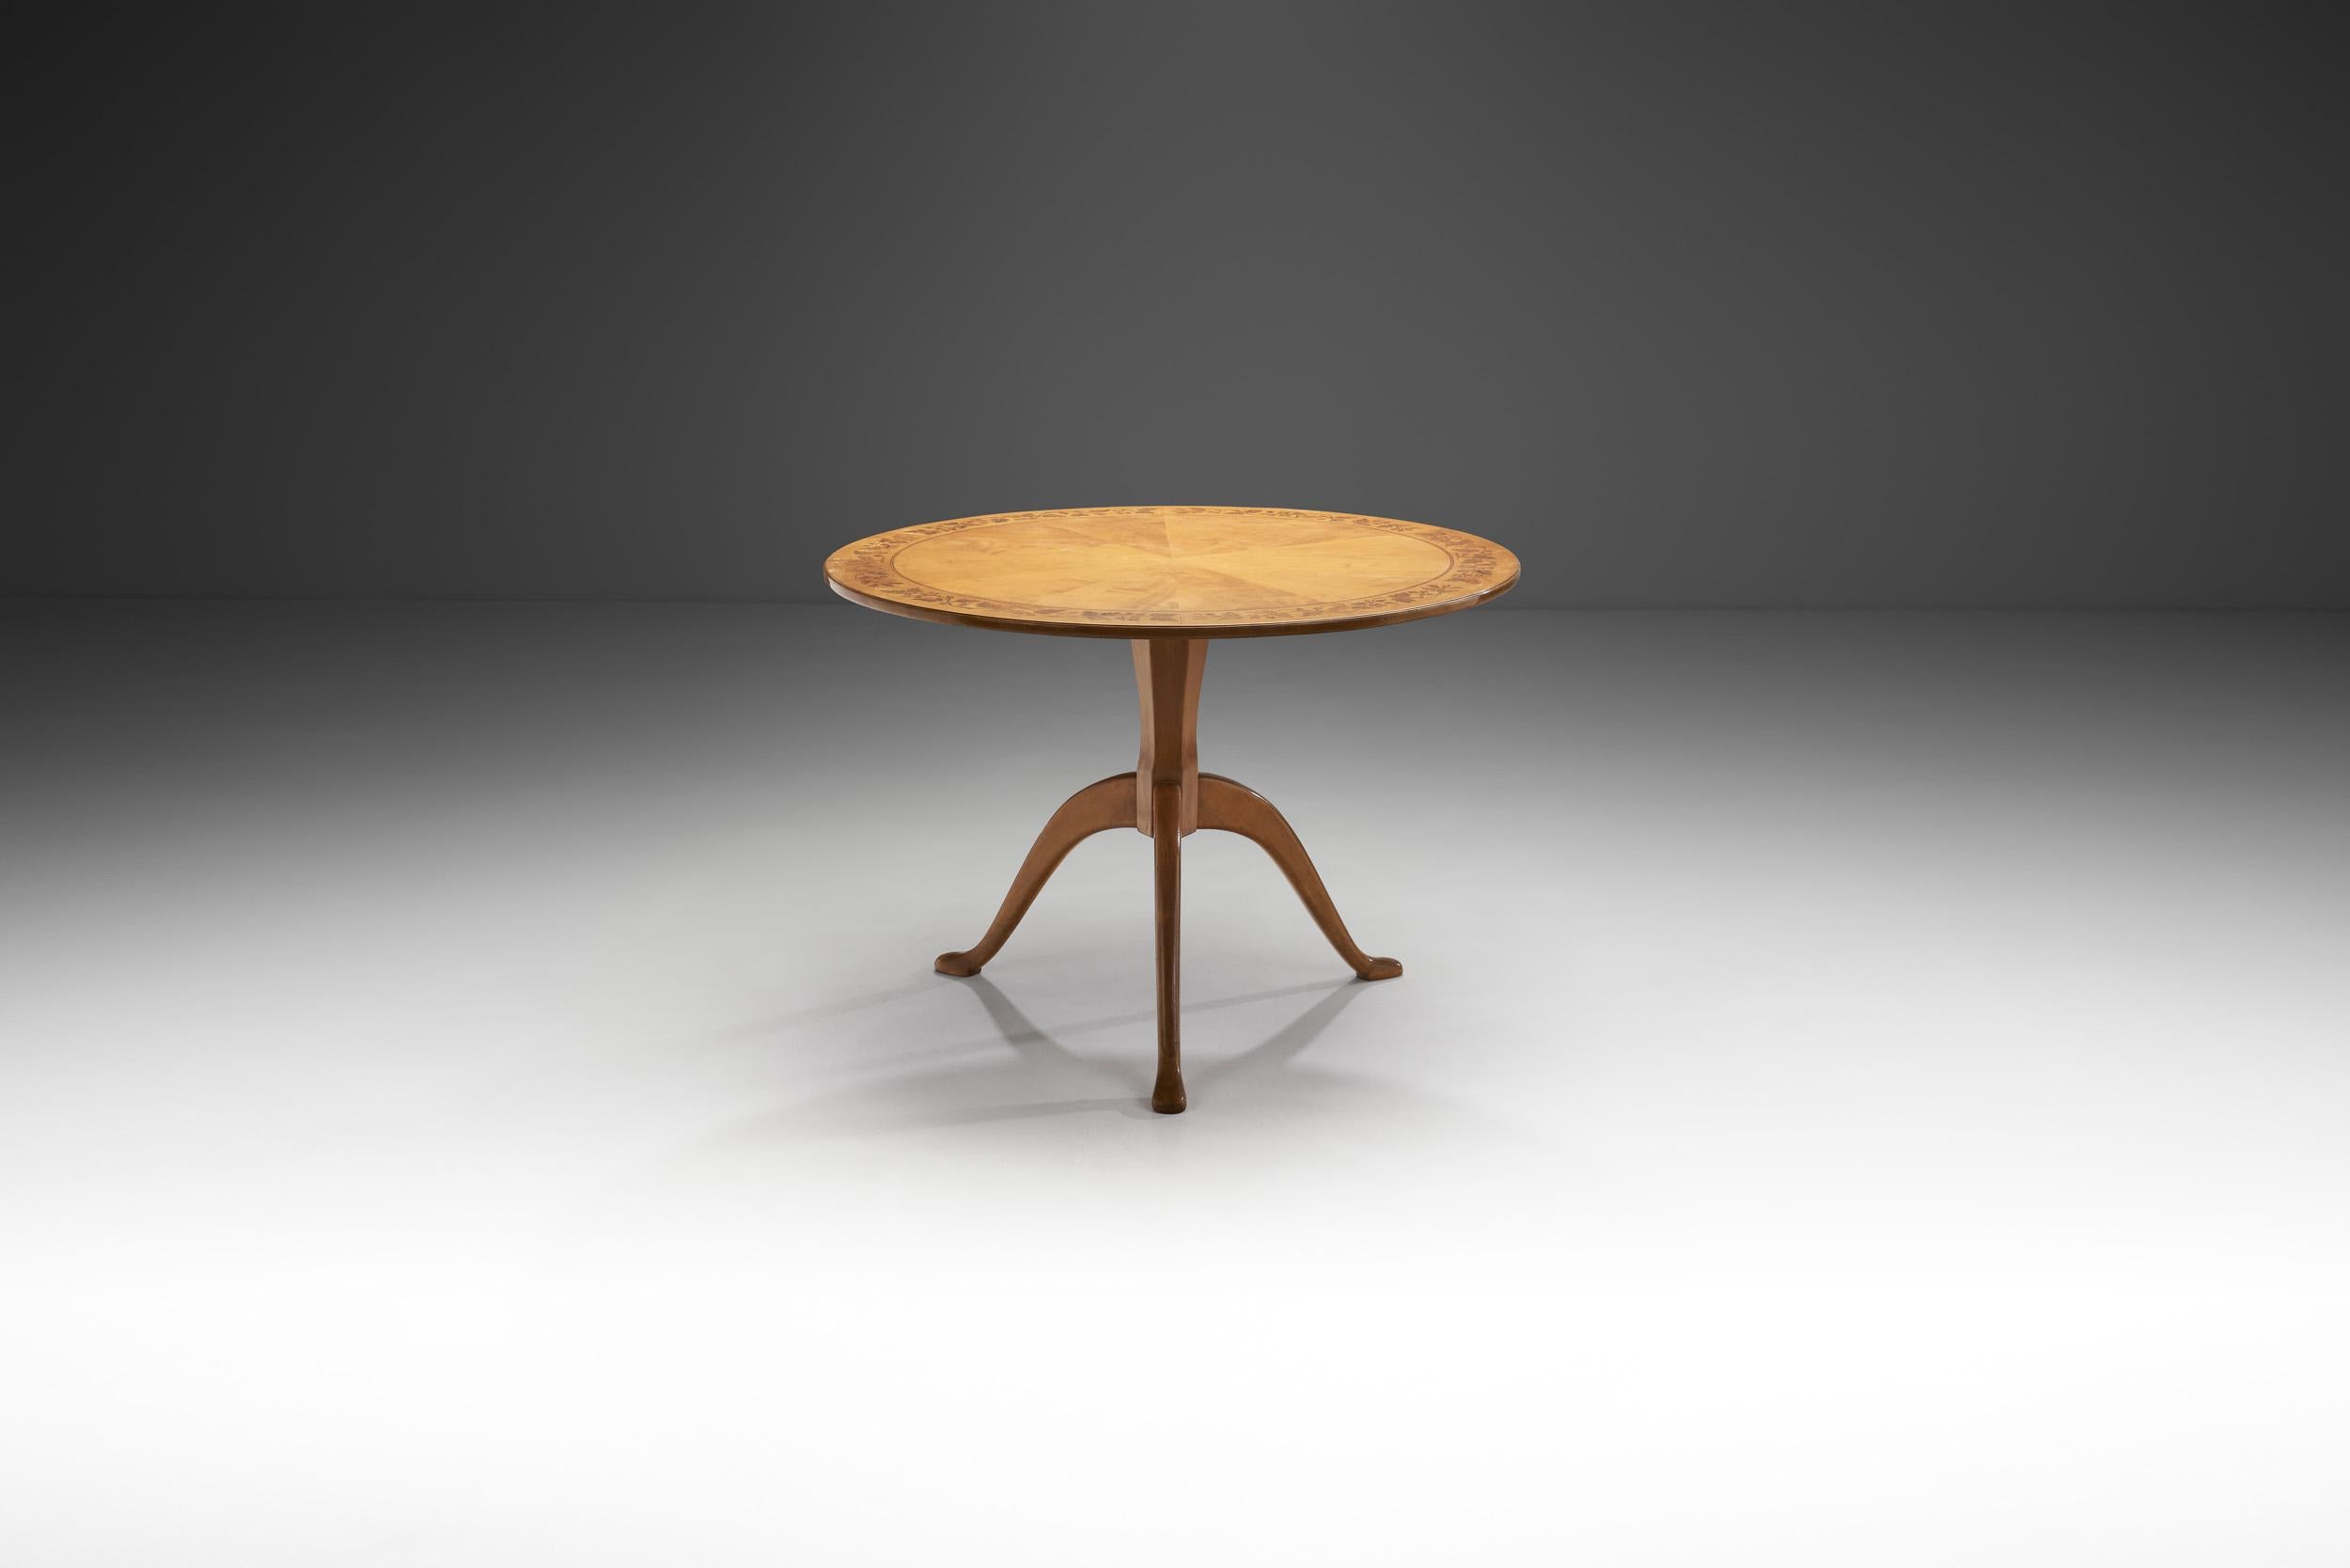 All edges are thoroughly broken, Carl Malmsten often wrote in his drawings. It was nature that was his great source of inspiration and in nature there are hardly any sharp edges or corners. This “Berg” table, designed in 1936, is one of the greatest